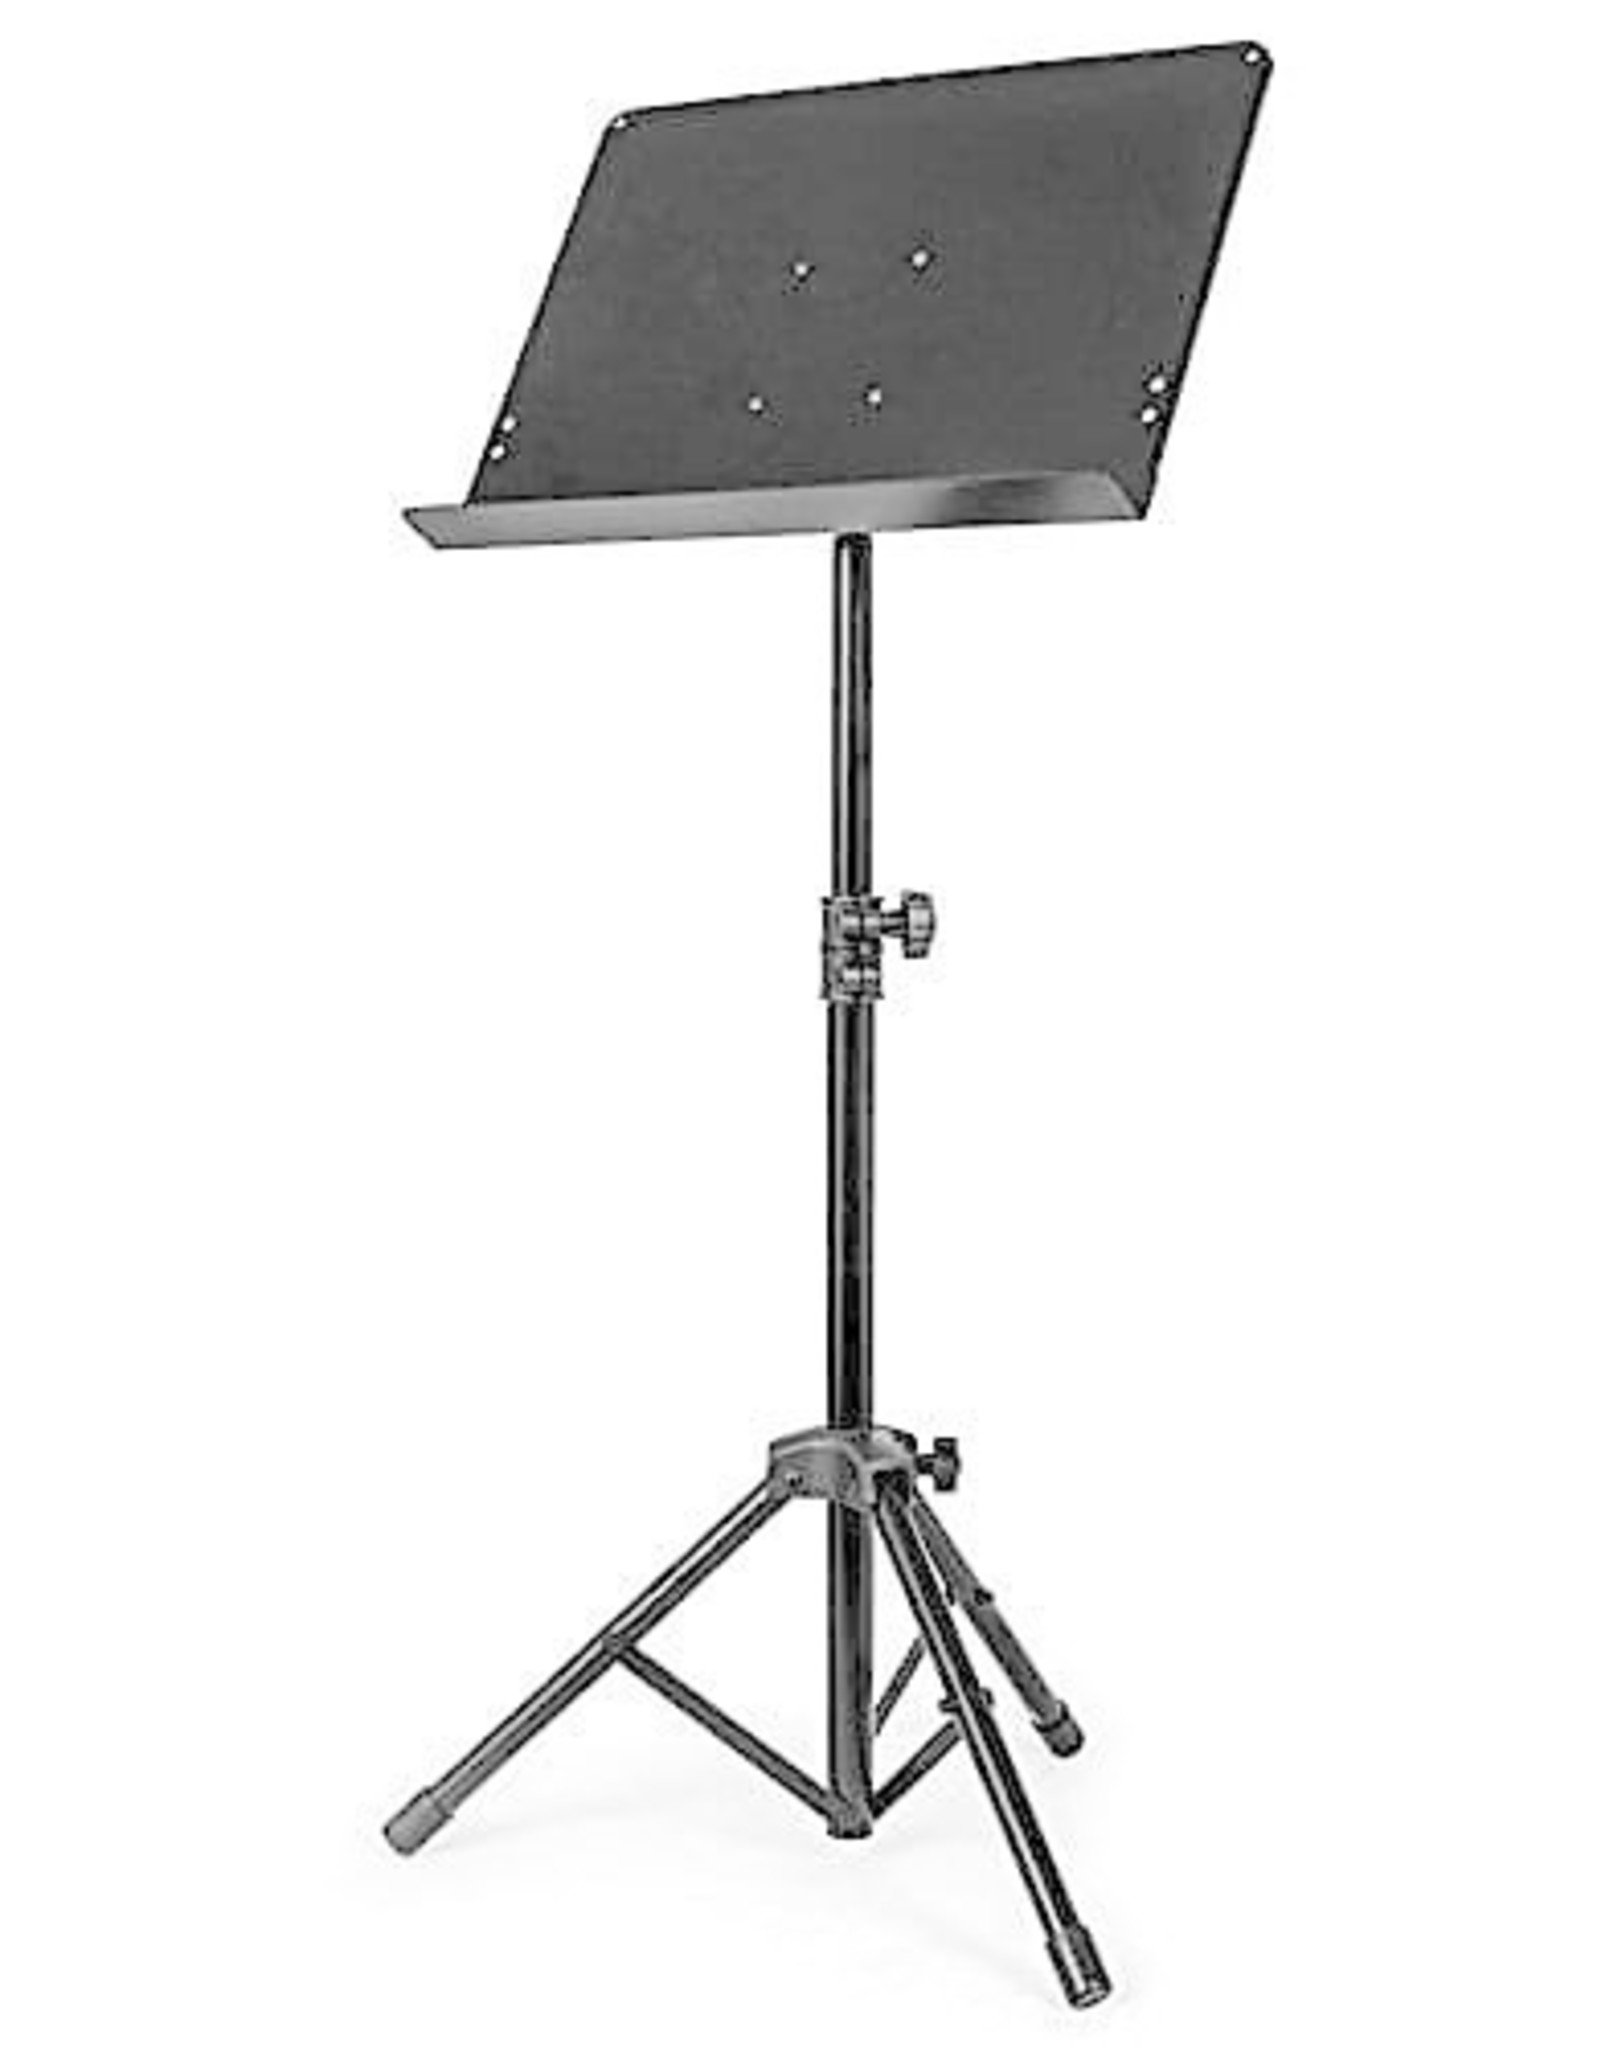 Nomad Nomad Heavy-duty Solid Desk Music Stand